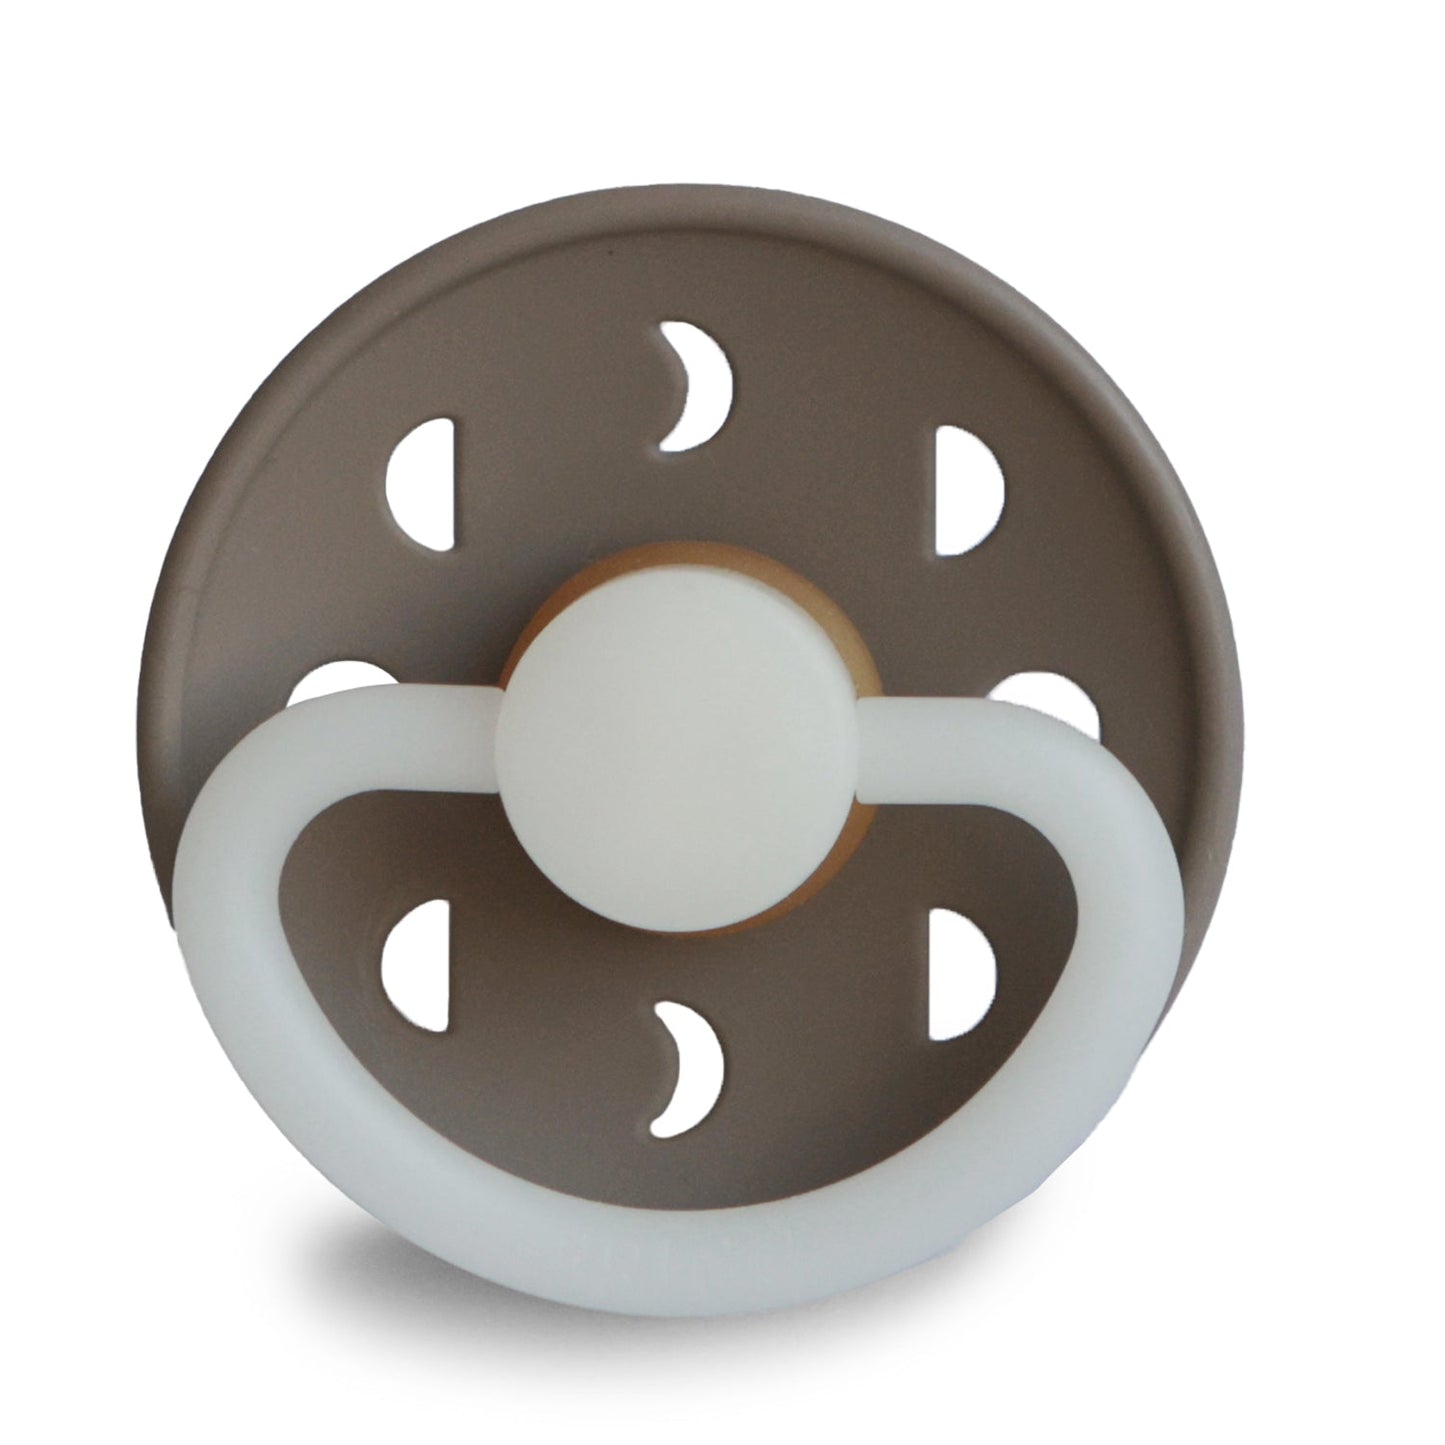 Frigg pacifier Silicone - FRIGG Moon Phase and Moon Phase Night - Size 2